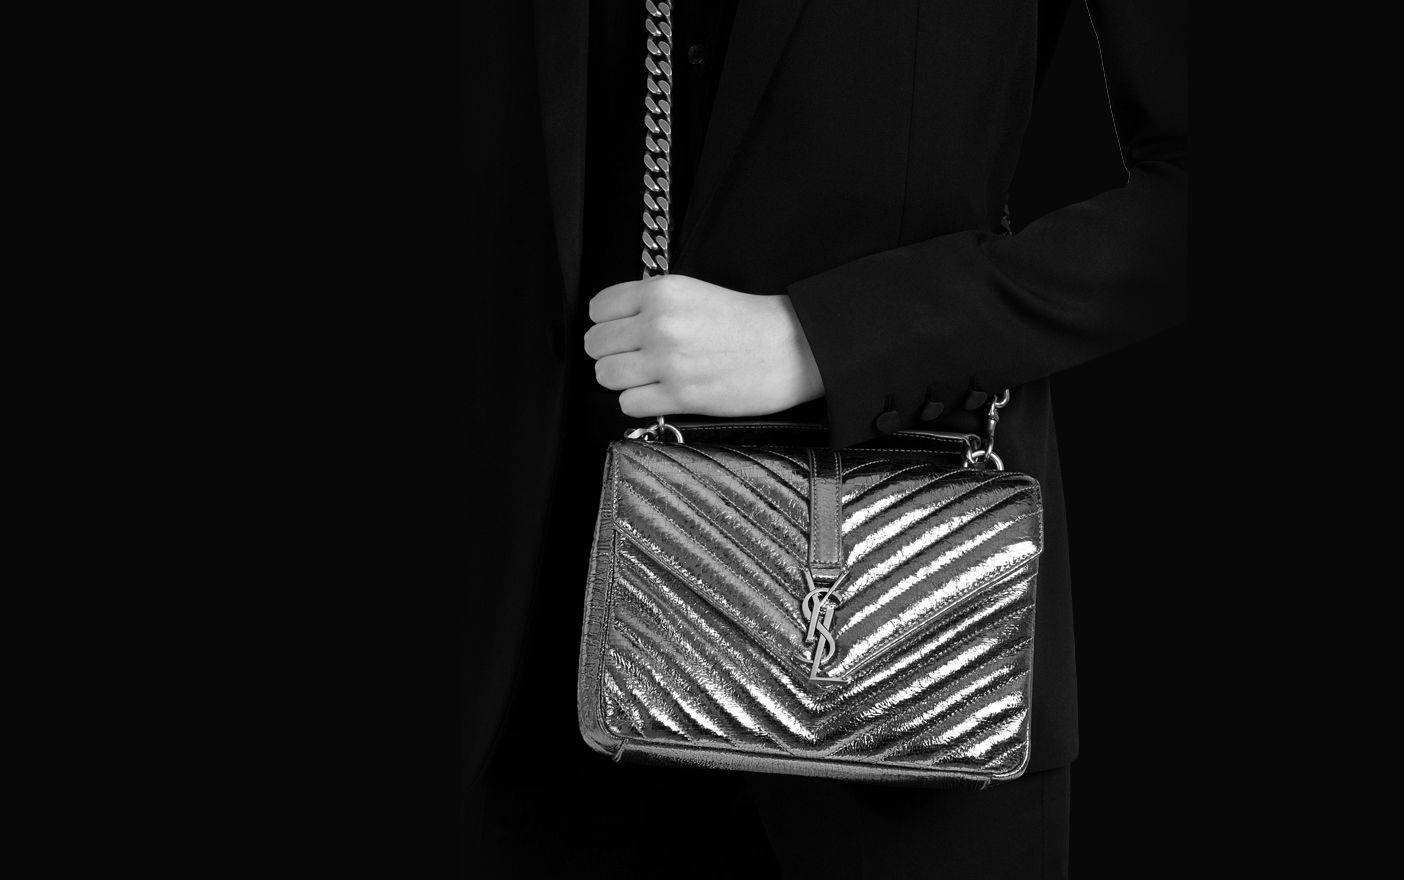 Get party-ready with these 5 new bags from Saint Laurent